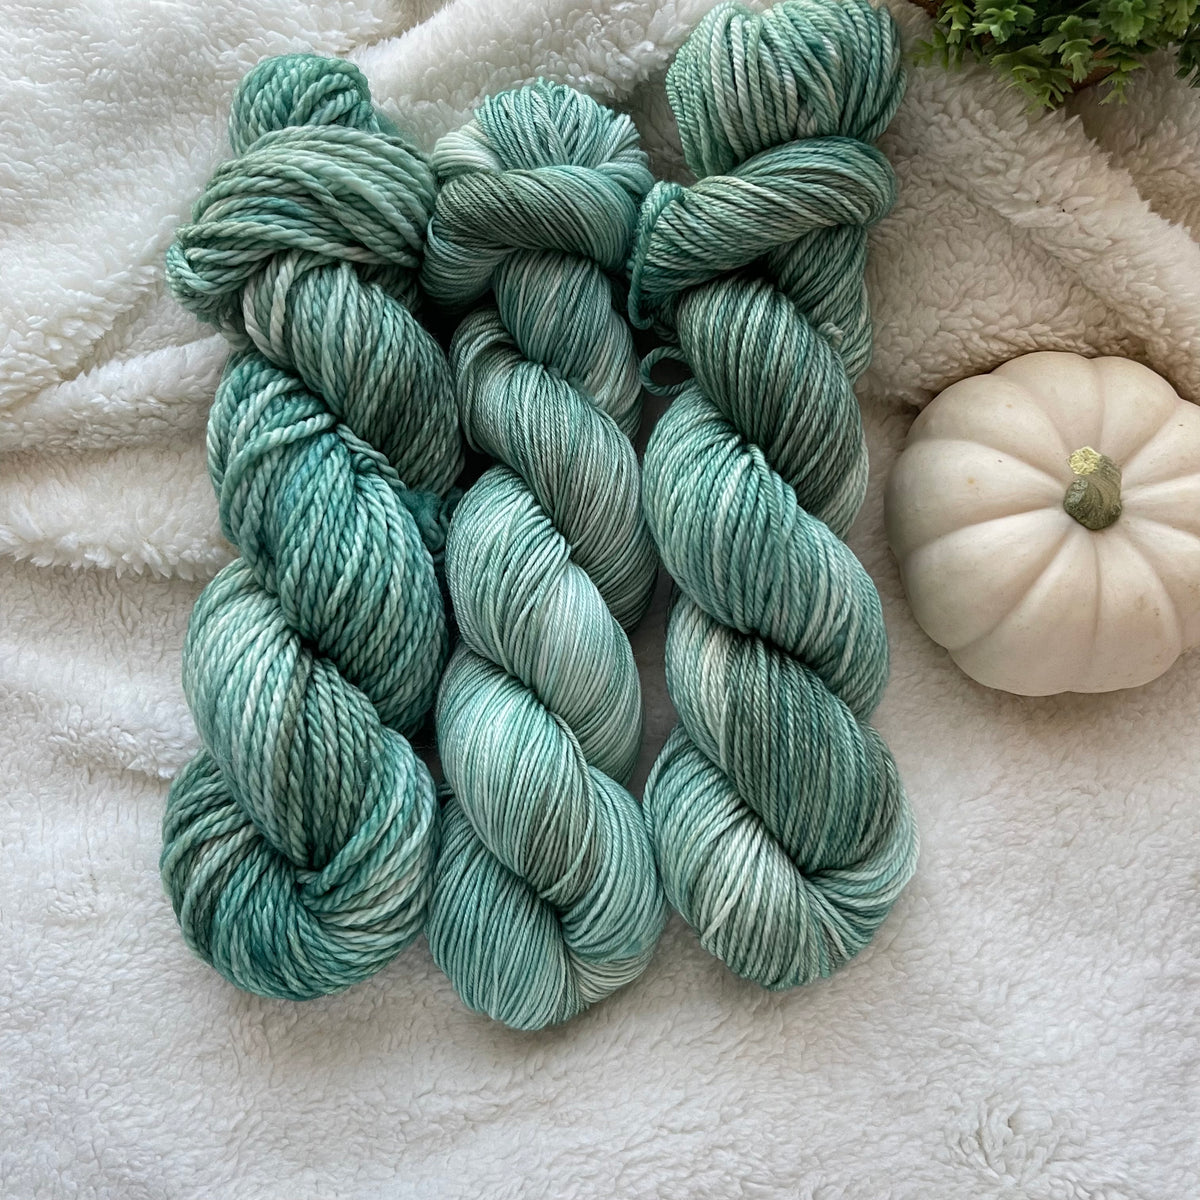 FALL FOG  -Dyed to Order - Hand Dyed Yarn Skein